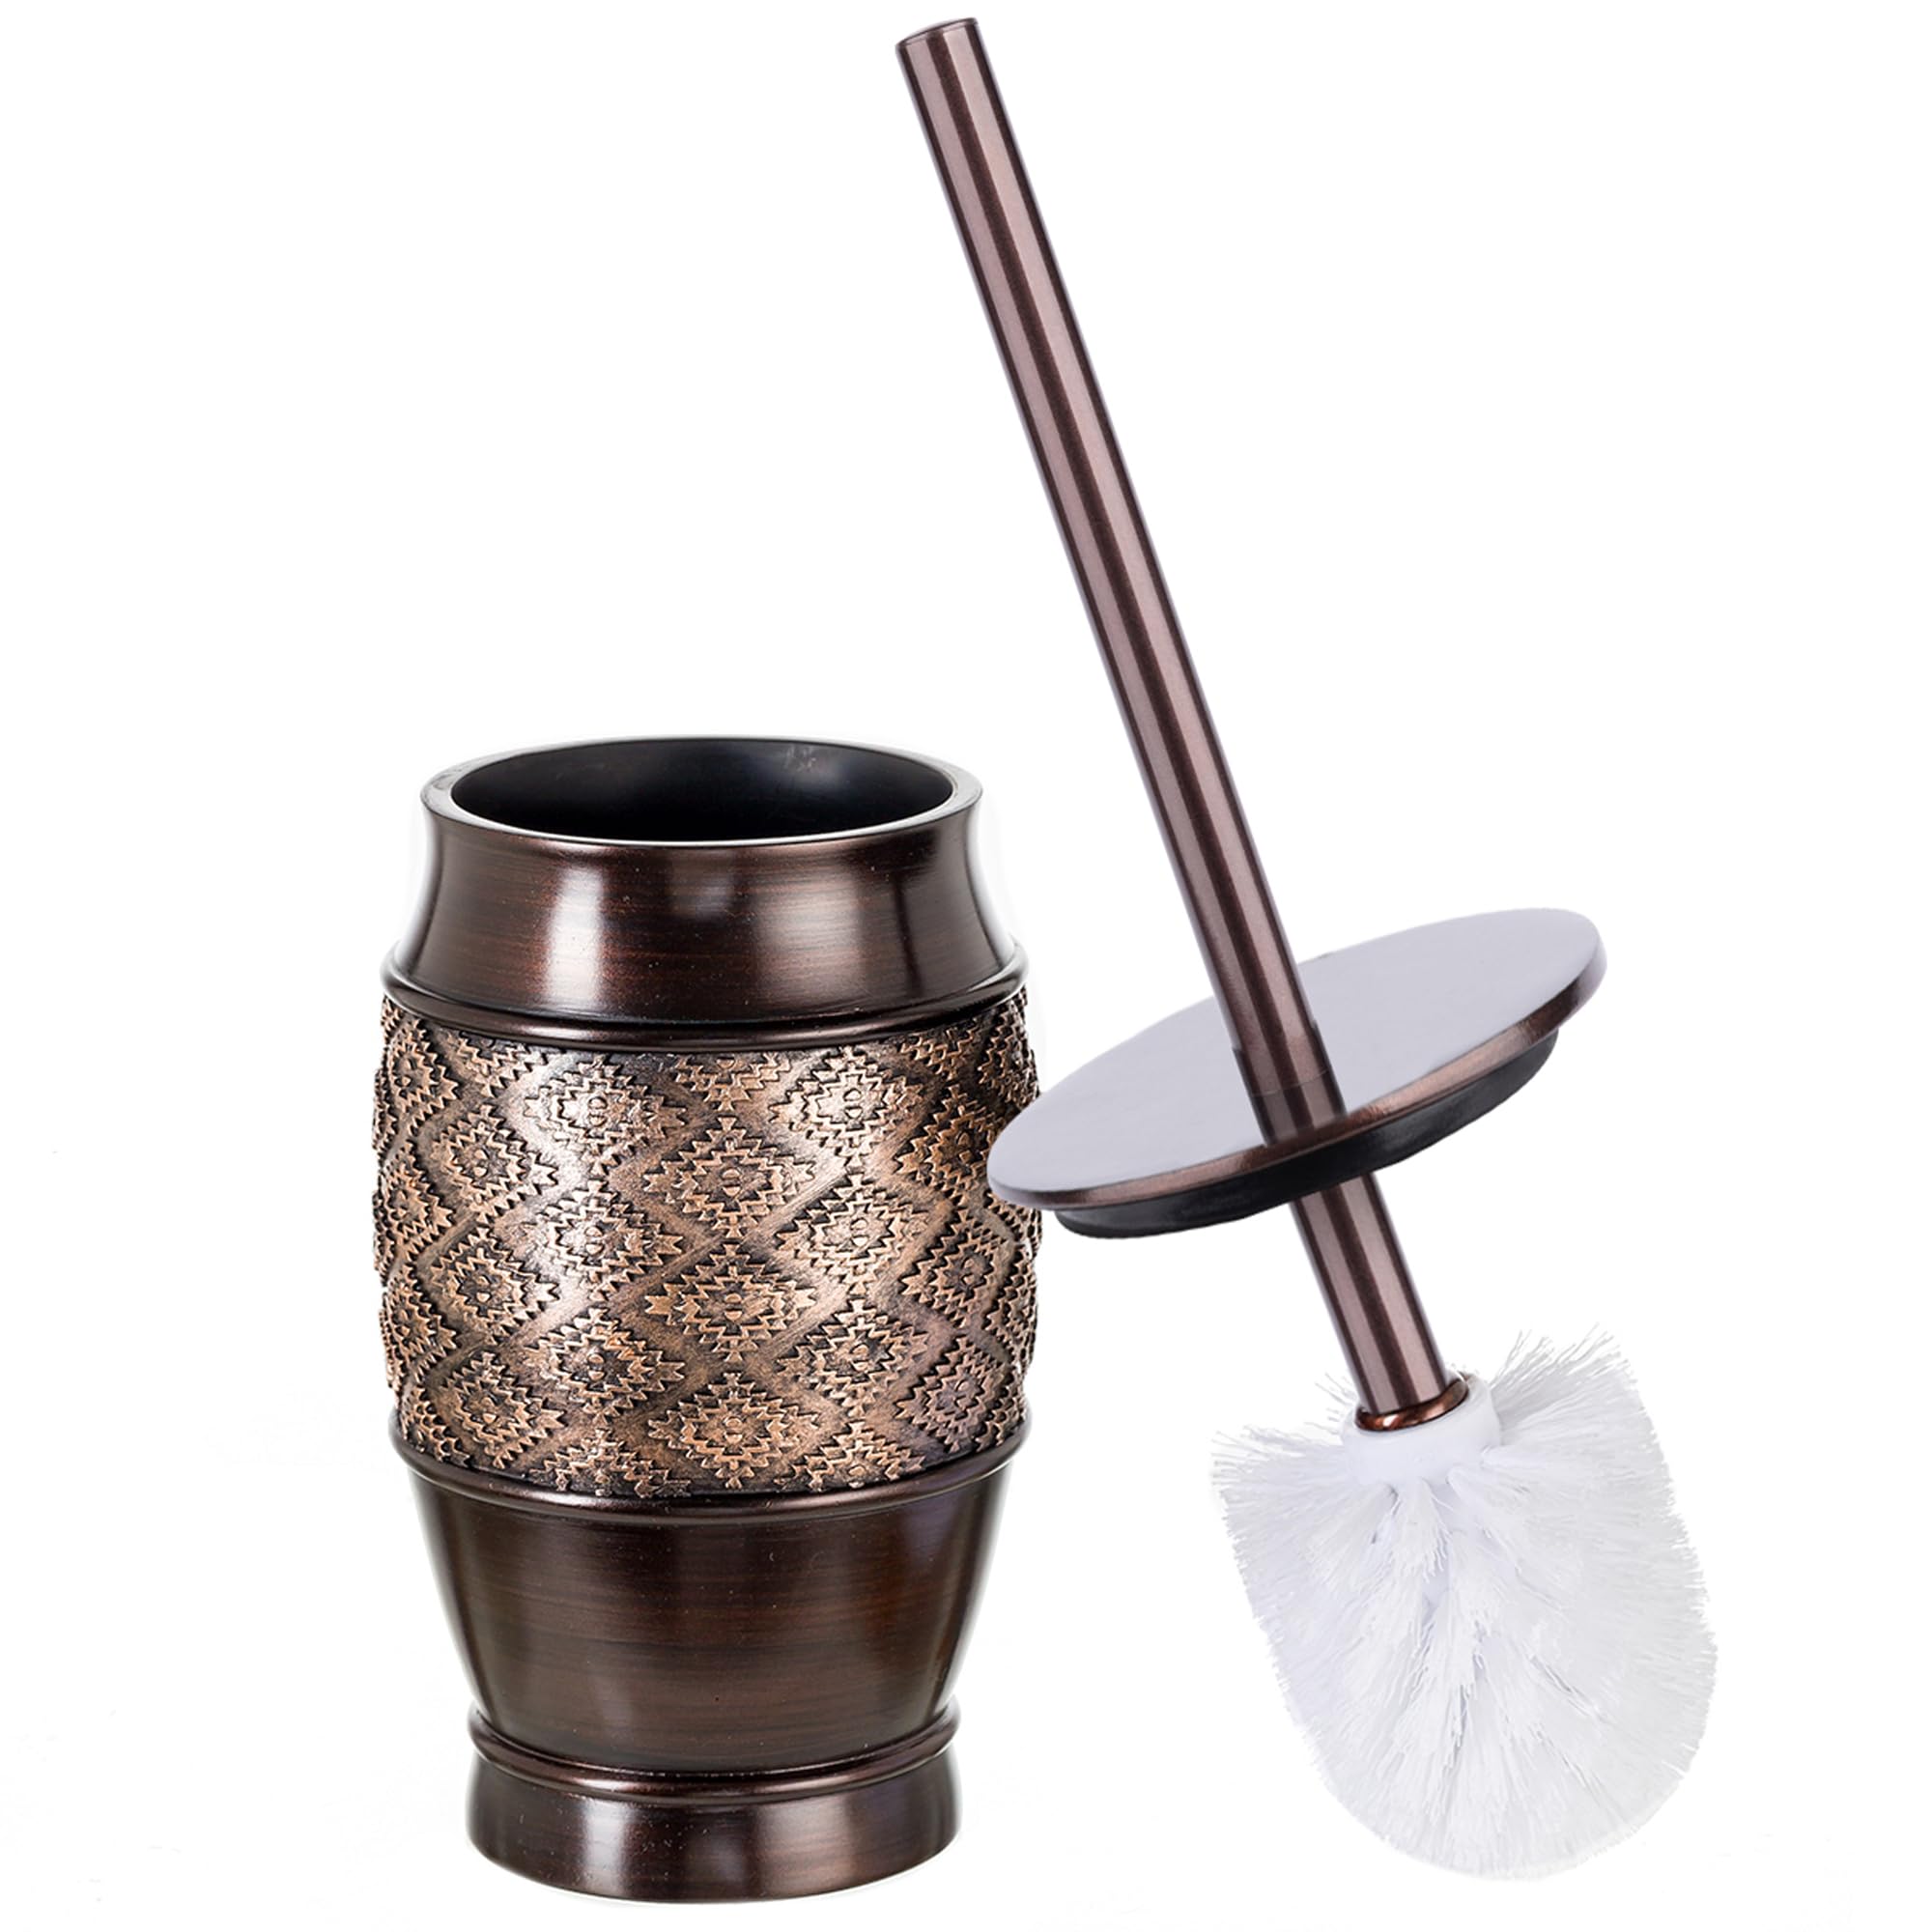 Creative Scents Dublin Toilet Brush Set - Toilet Bowl Cleaner Brush and Holder - Decorative Toilet Bowl Scrubber - Space Saving Design 5" x 5" x 15"H, Contemporary Toilet Bowl Cleaner (Brown)  - Like New